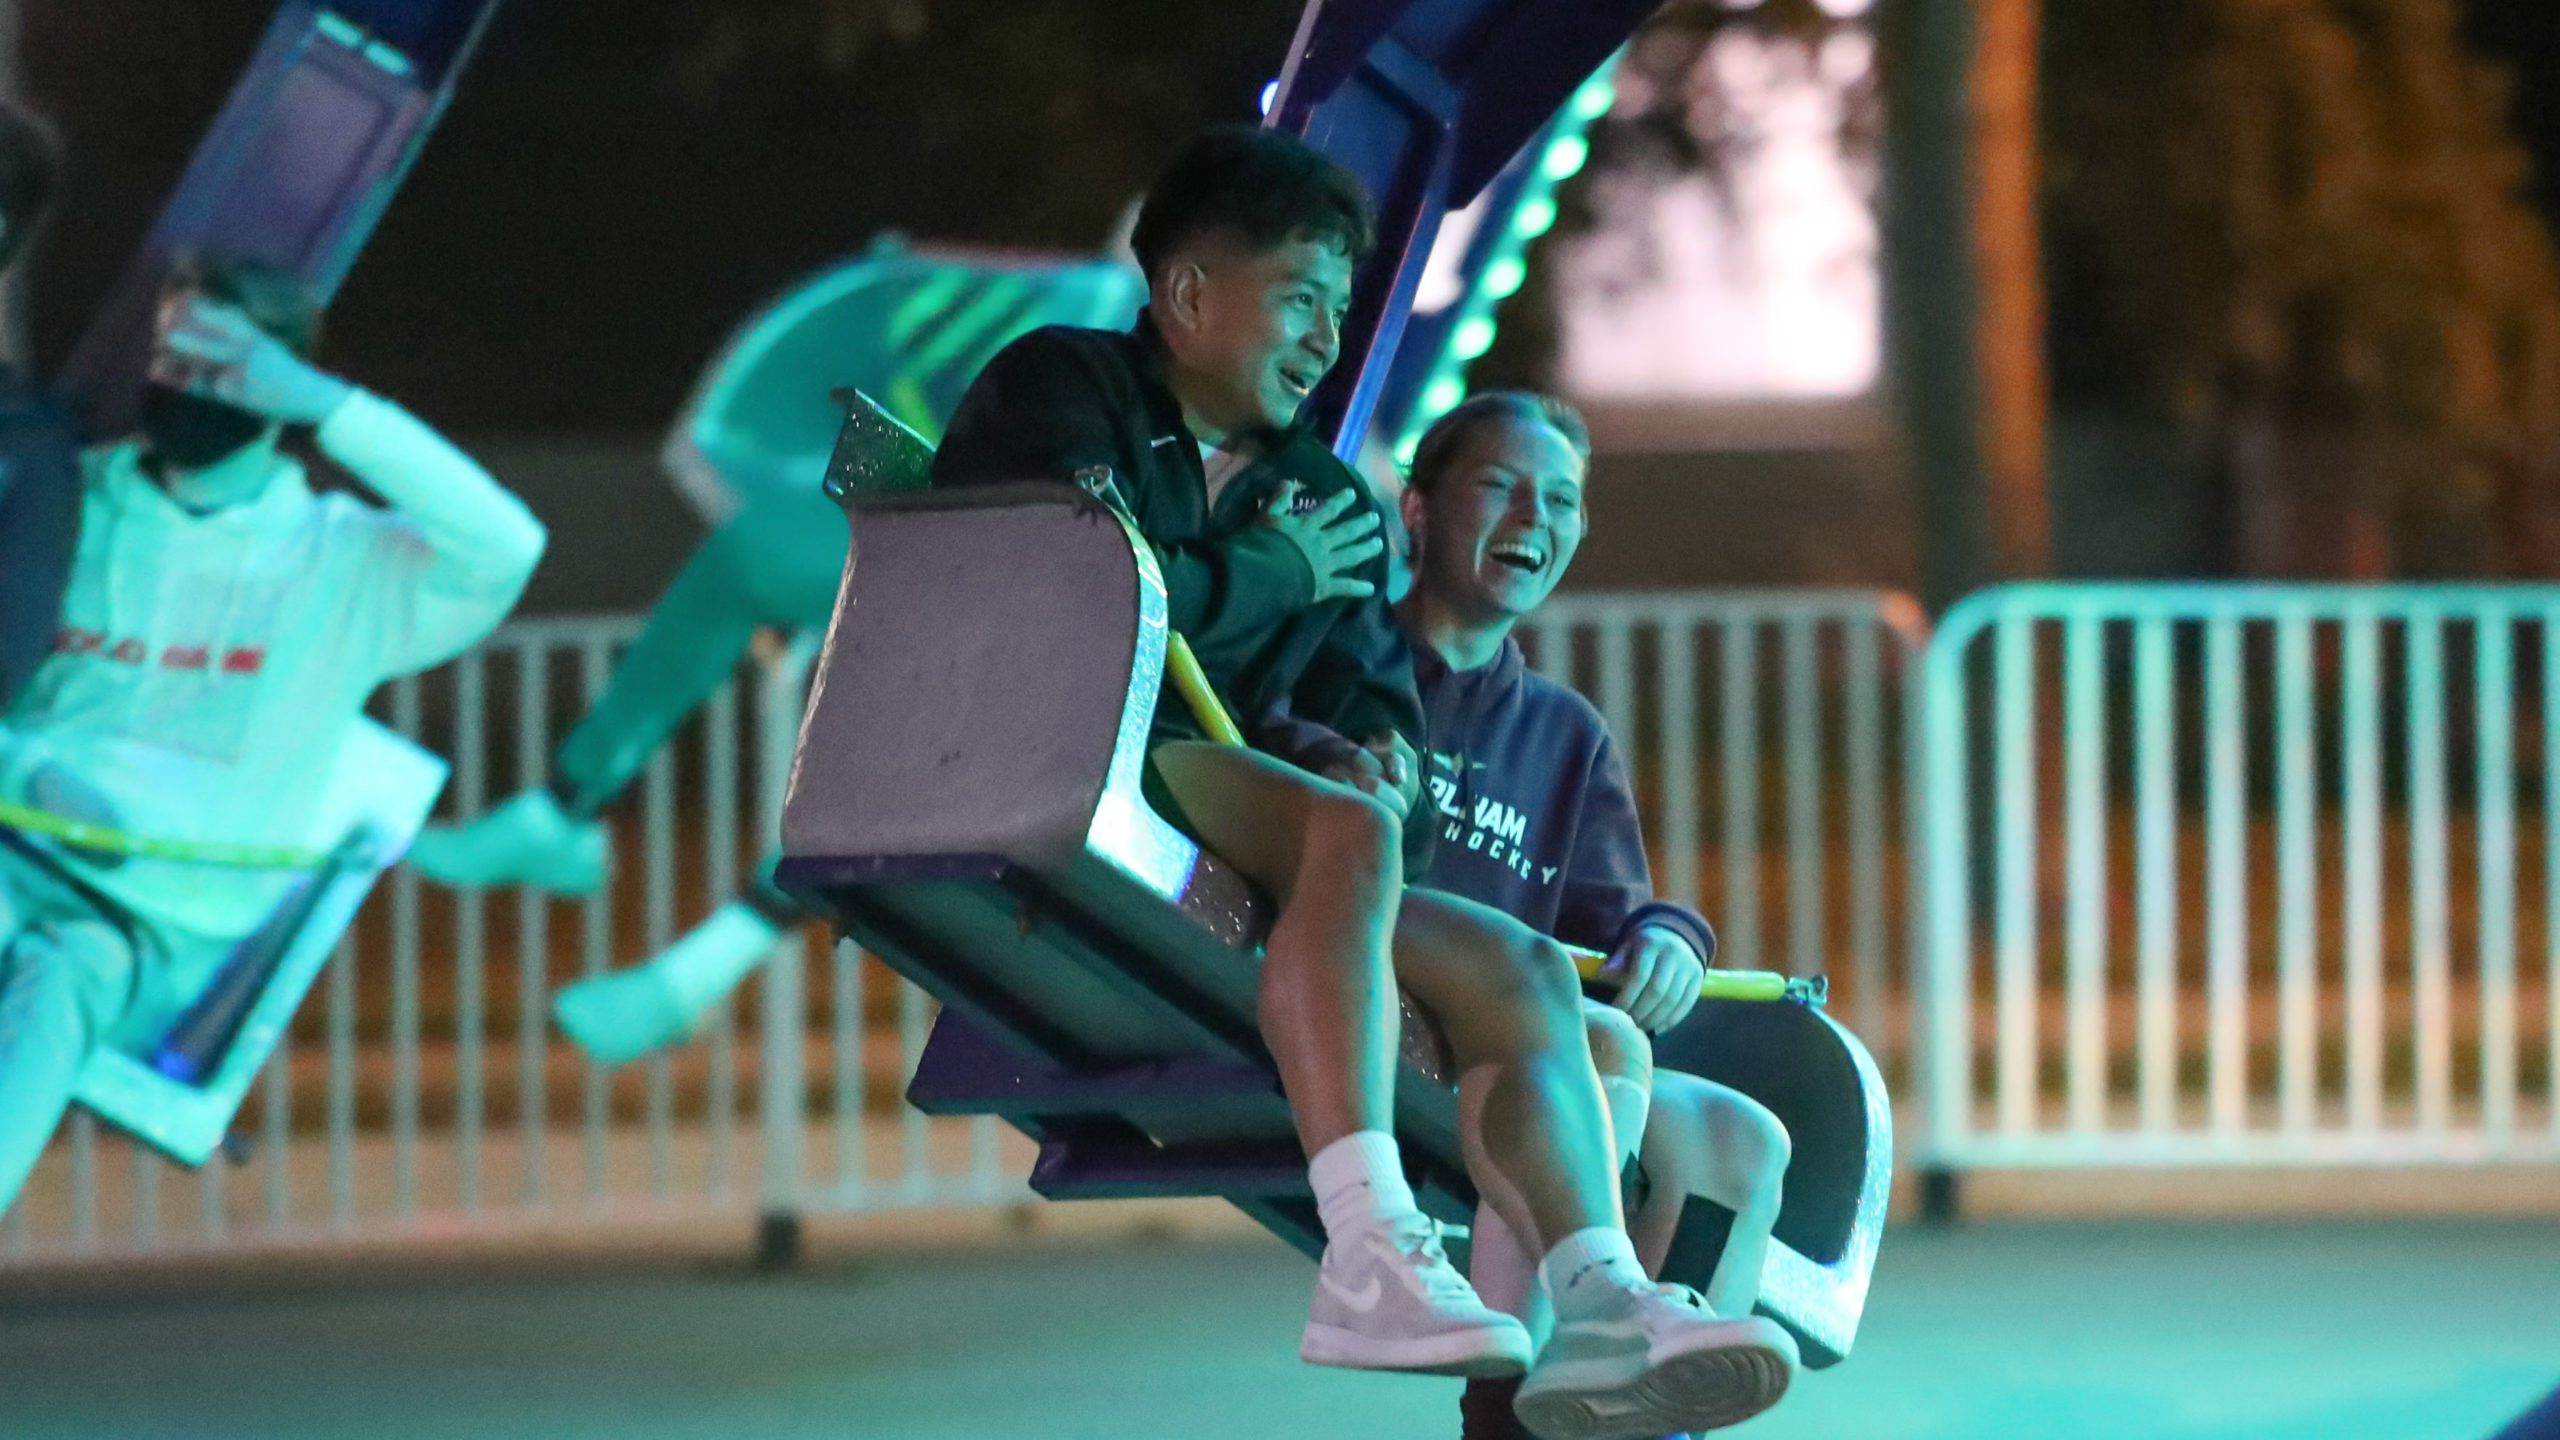 Students enjoy themselves on carnival ride at Earlham.